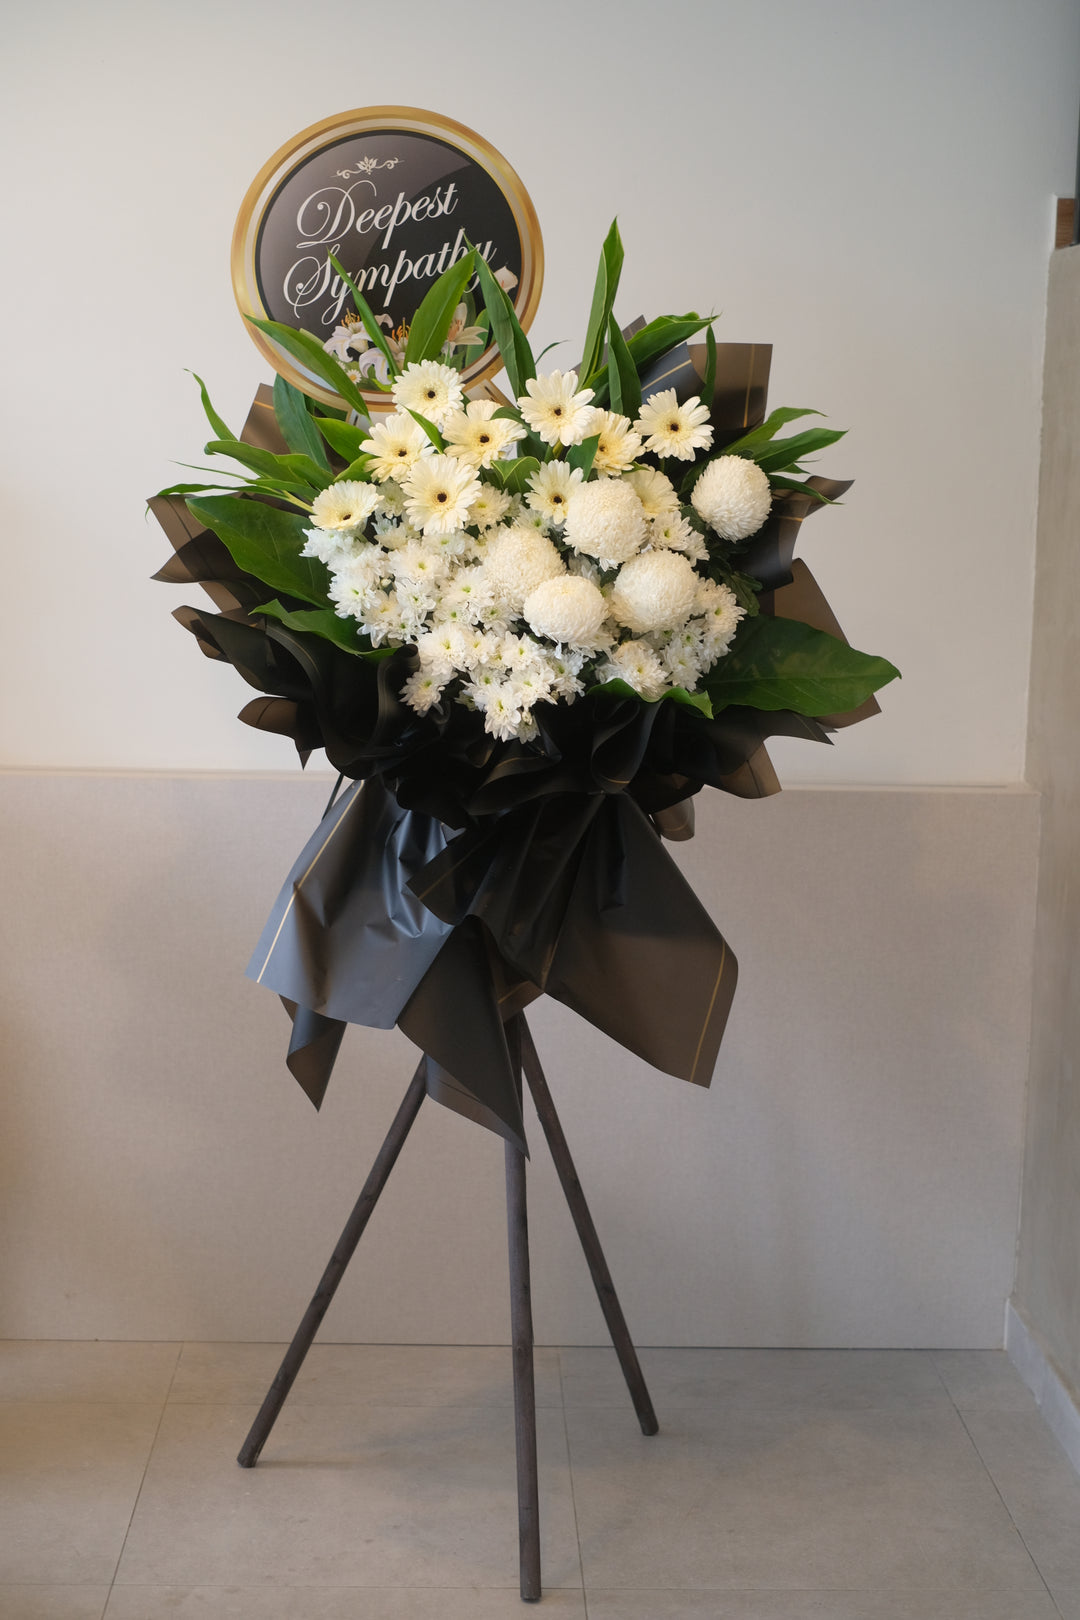 condolences flowers same day delivery in penang